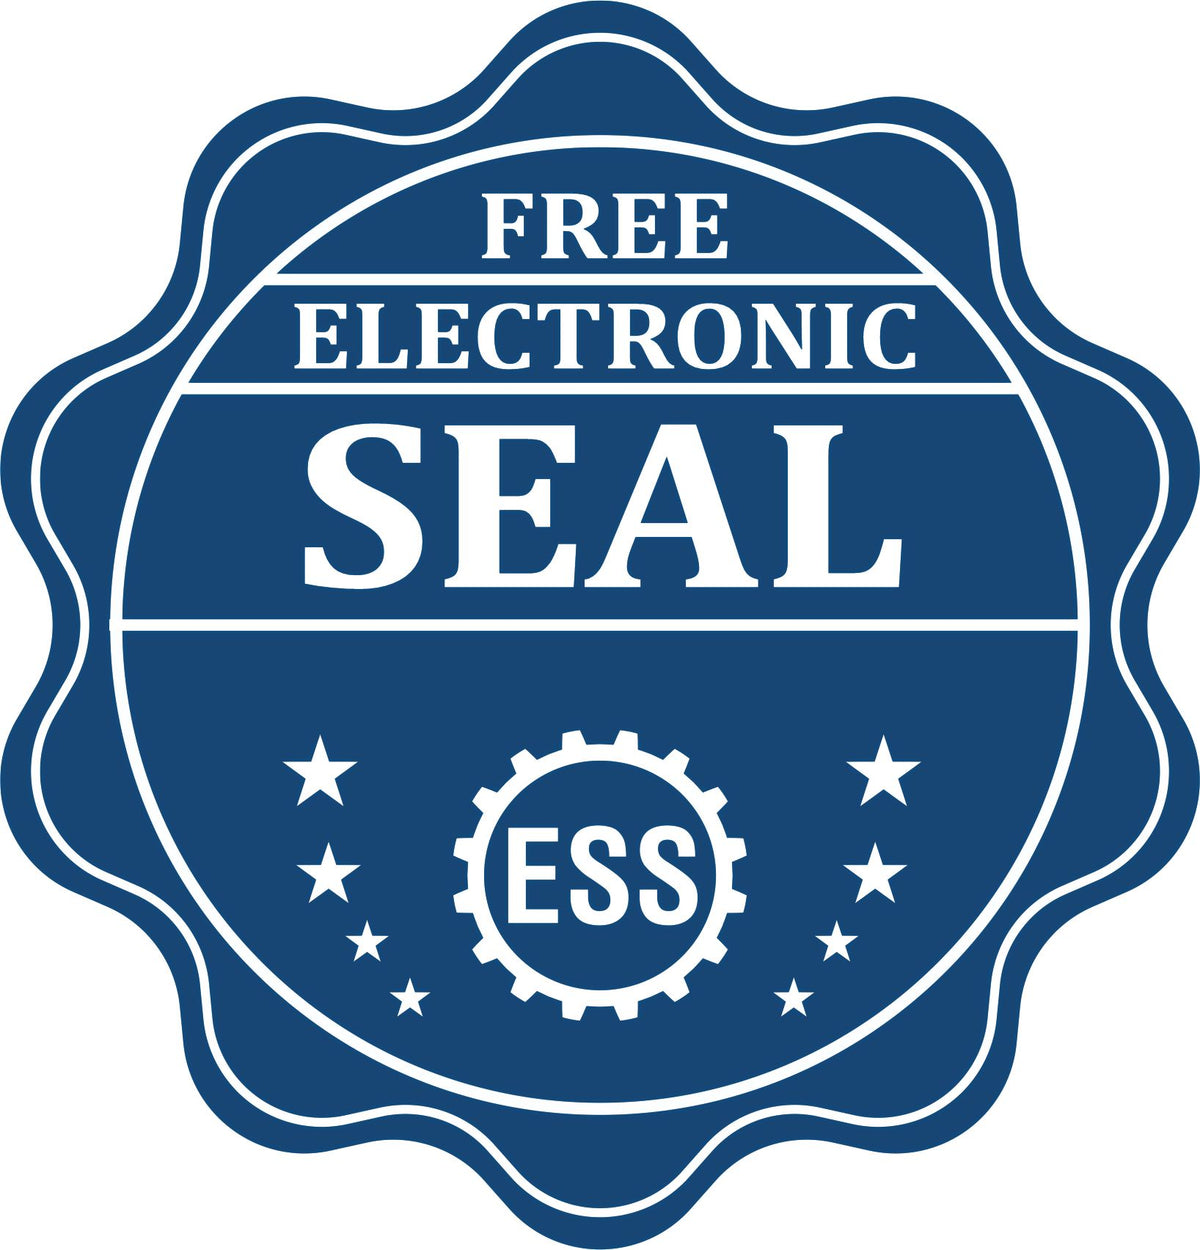 A badge showing a free electronic seal for the Gift Delaware Land Surveyor Seal with stars and the ESS gear on the emblem.